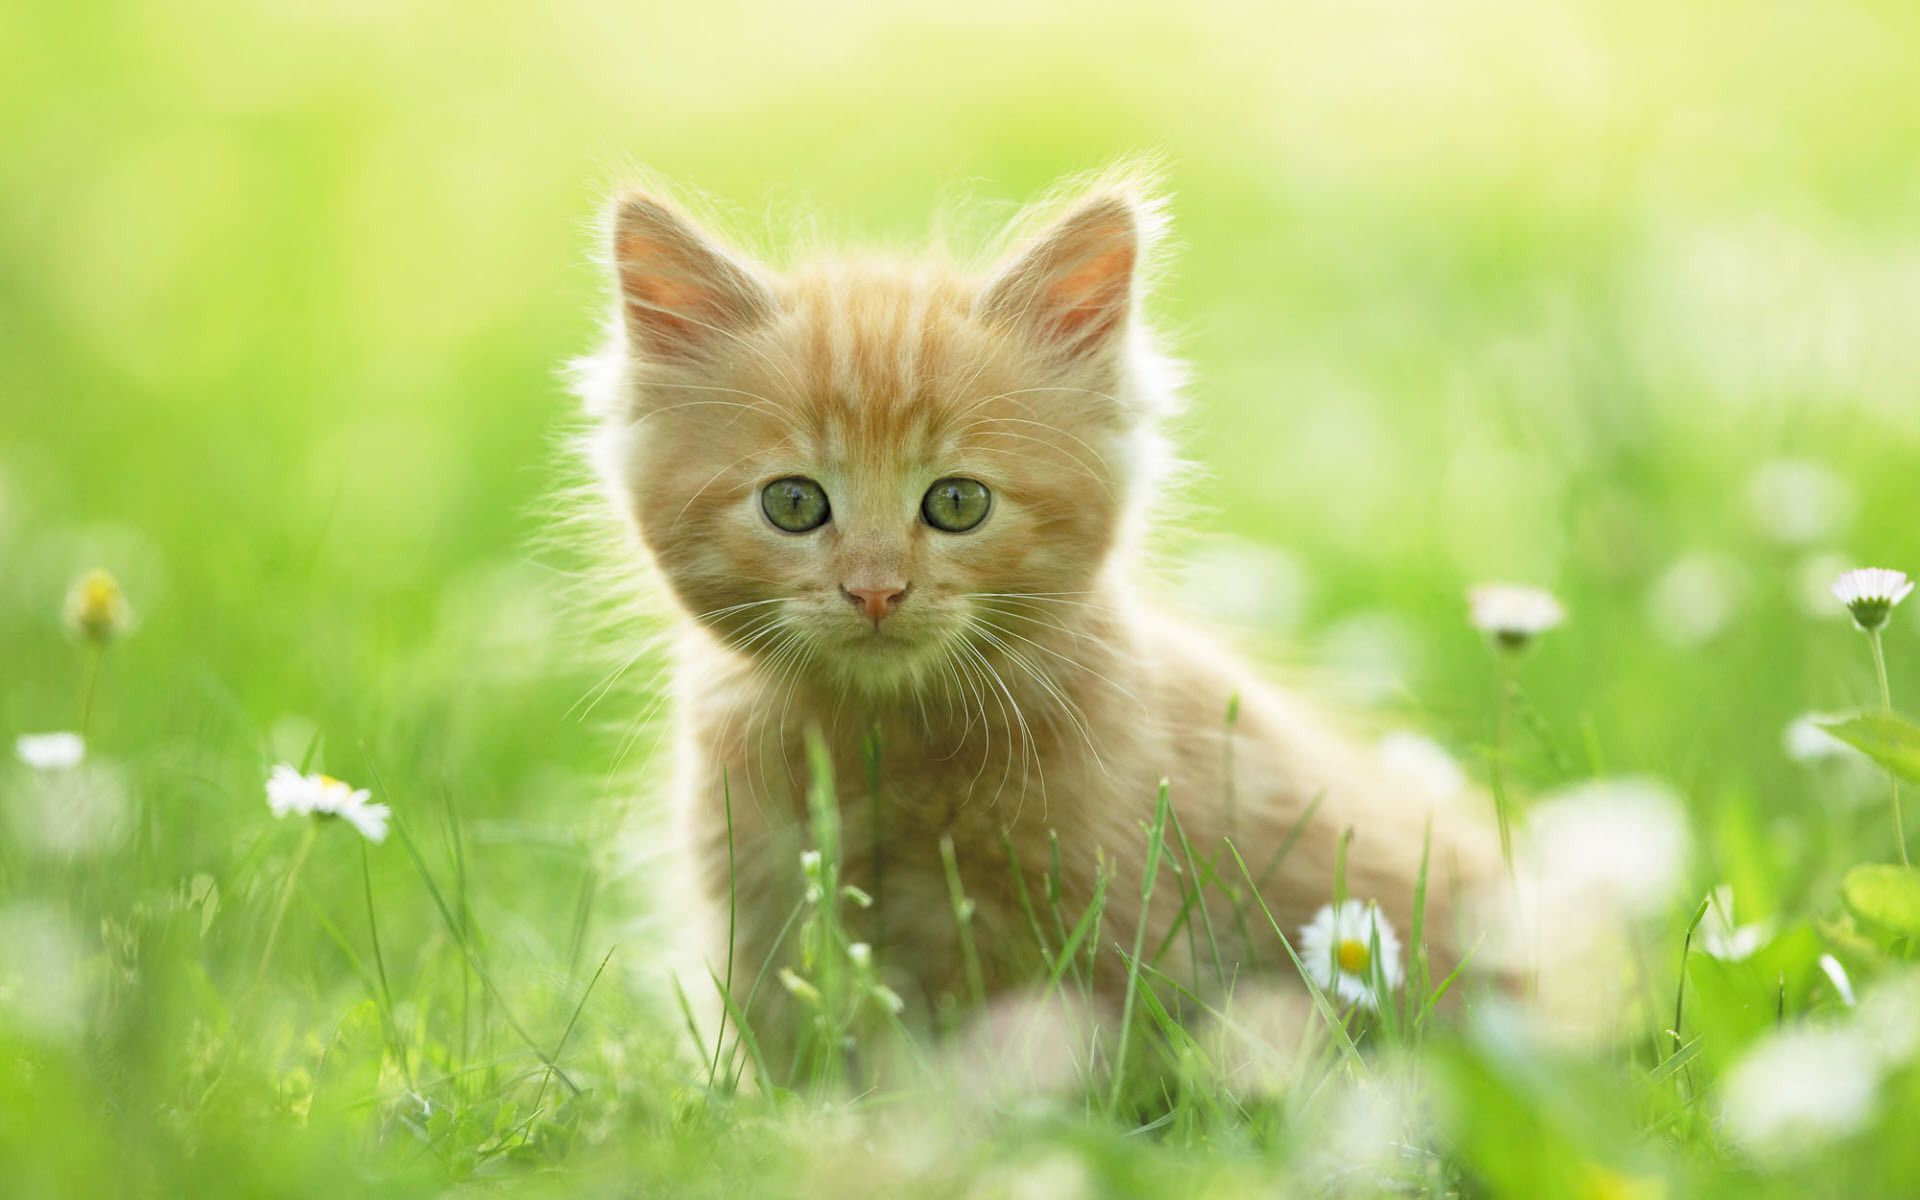 Cute Kitty Wallpaper 66 images